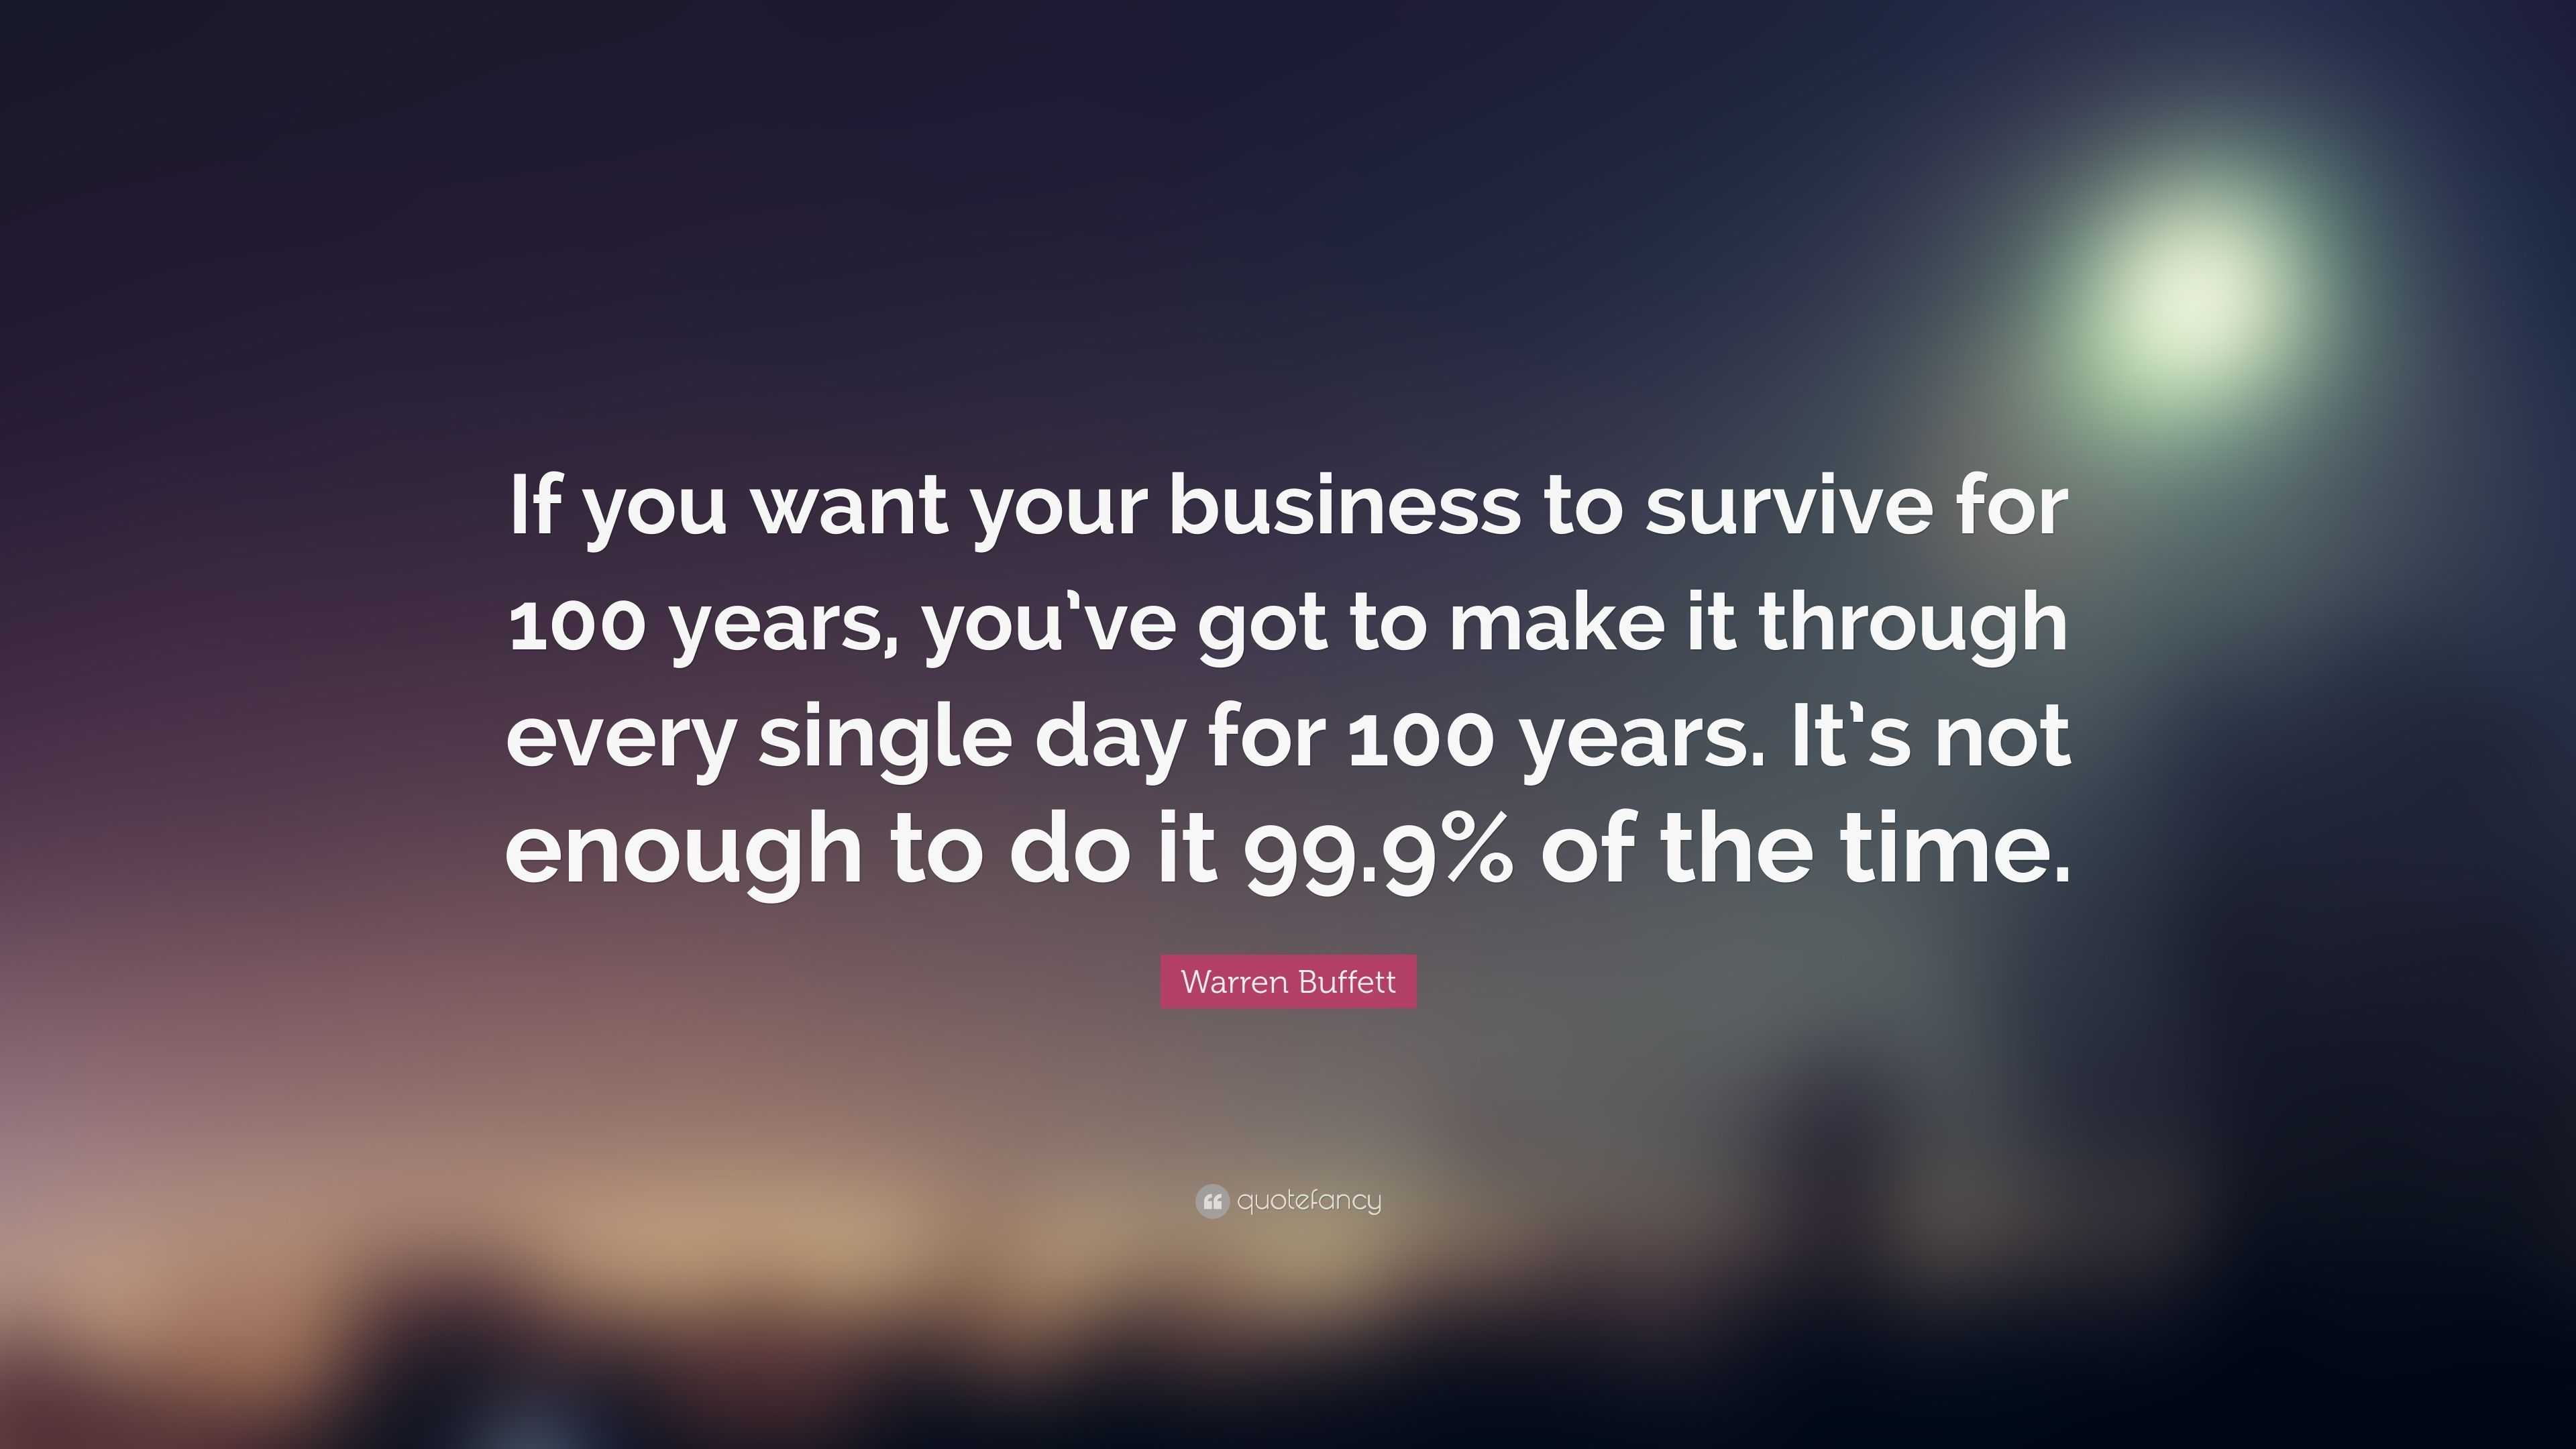 Warren Buffett Quote: “If you want your business to survive for